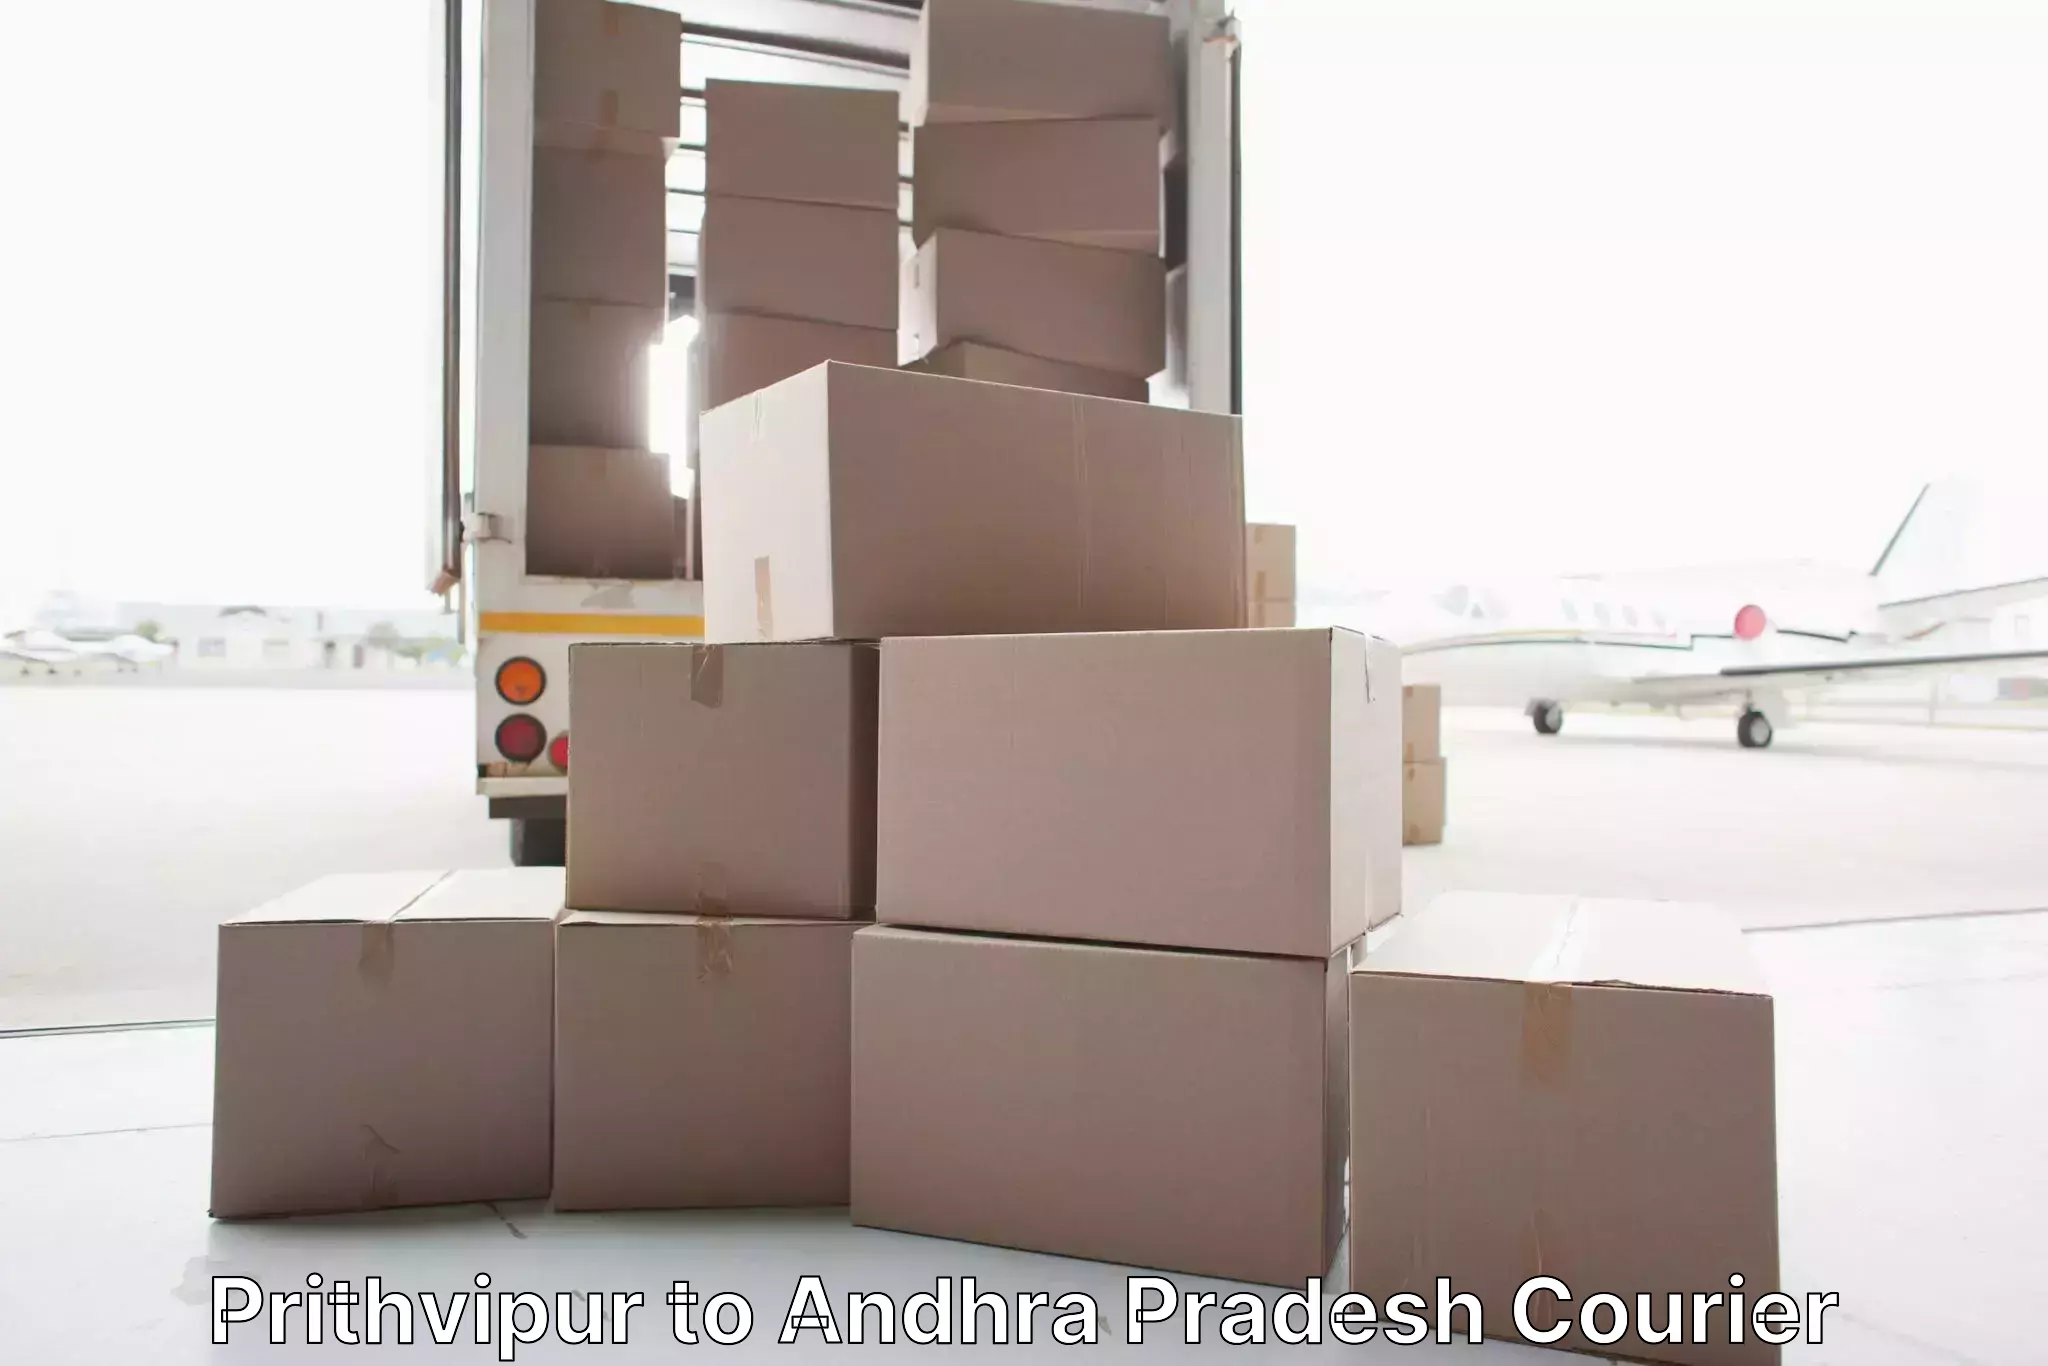 Reliable relocation services in Prithvipur to Chilakaluripet